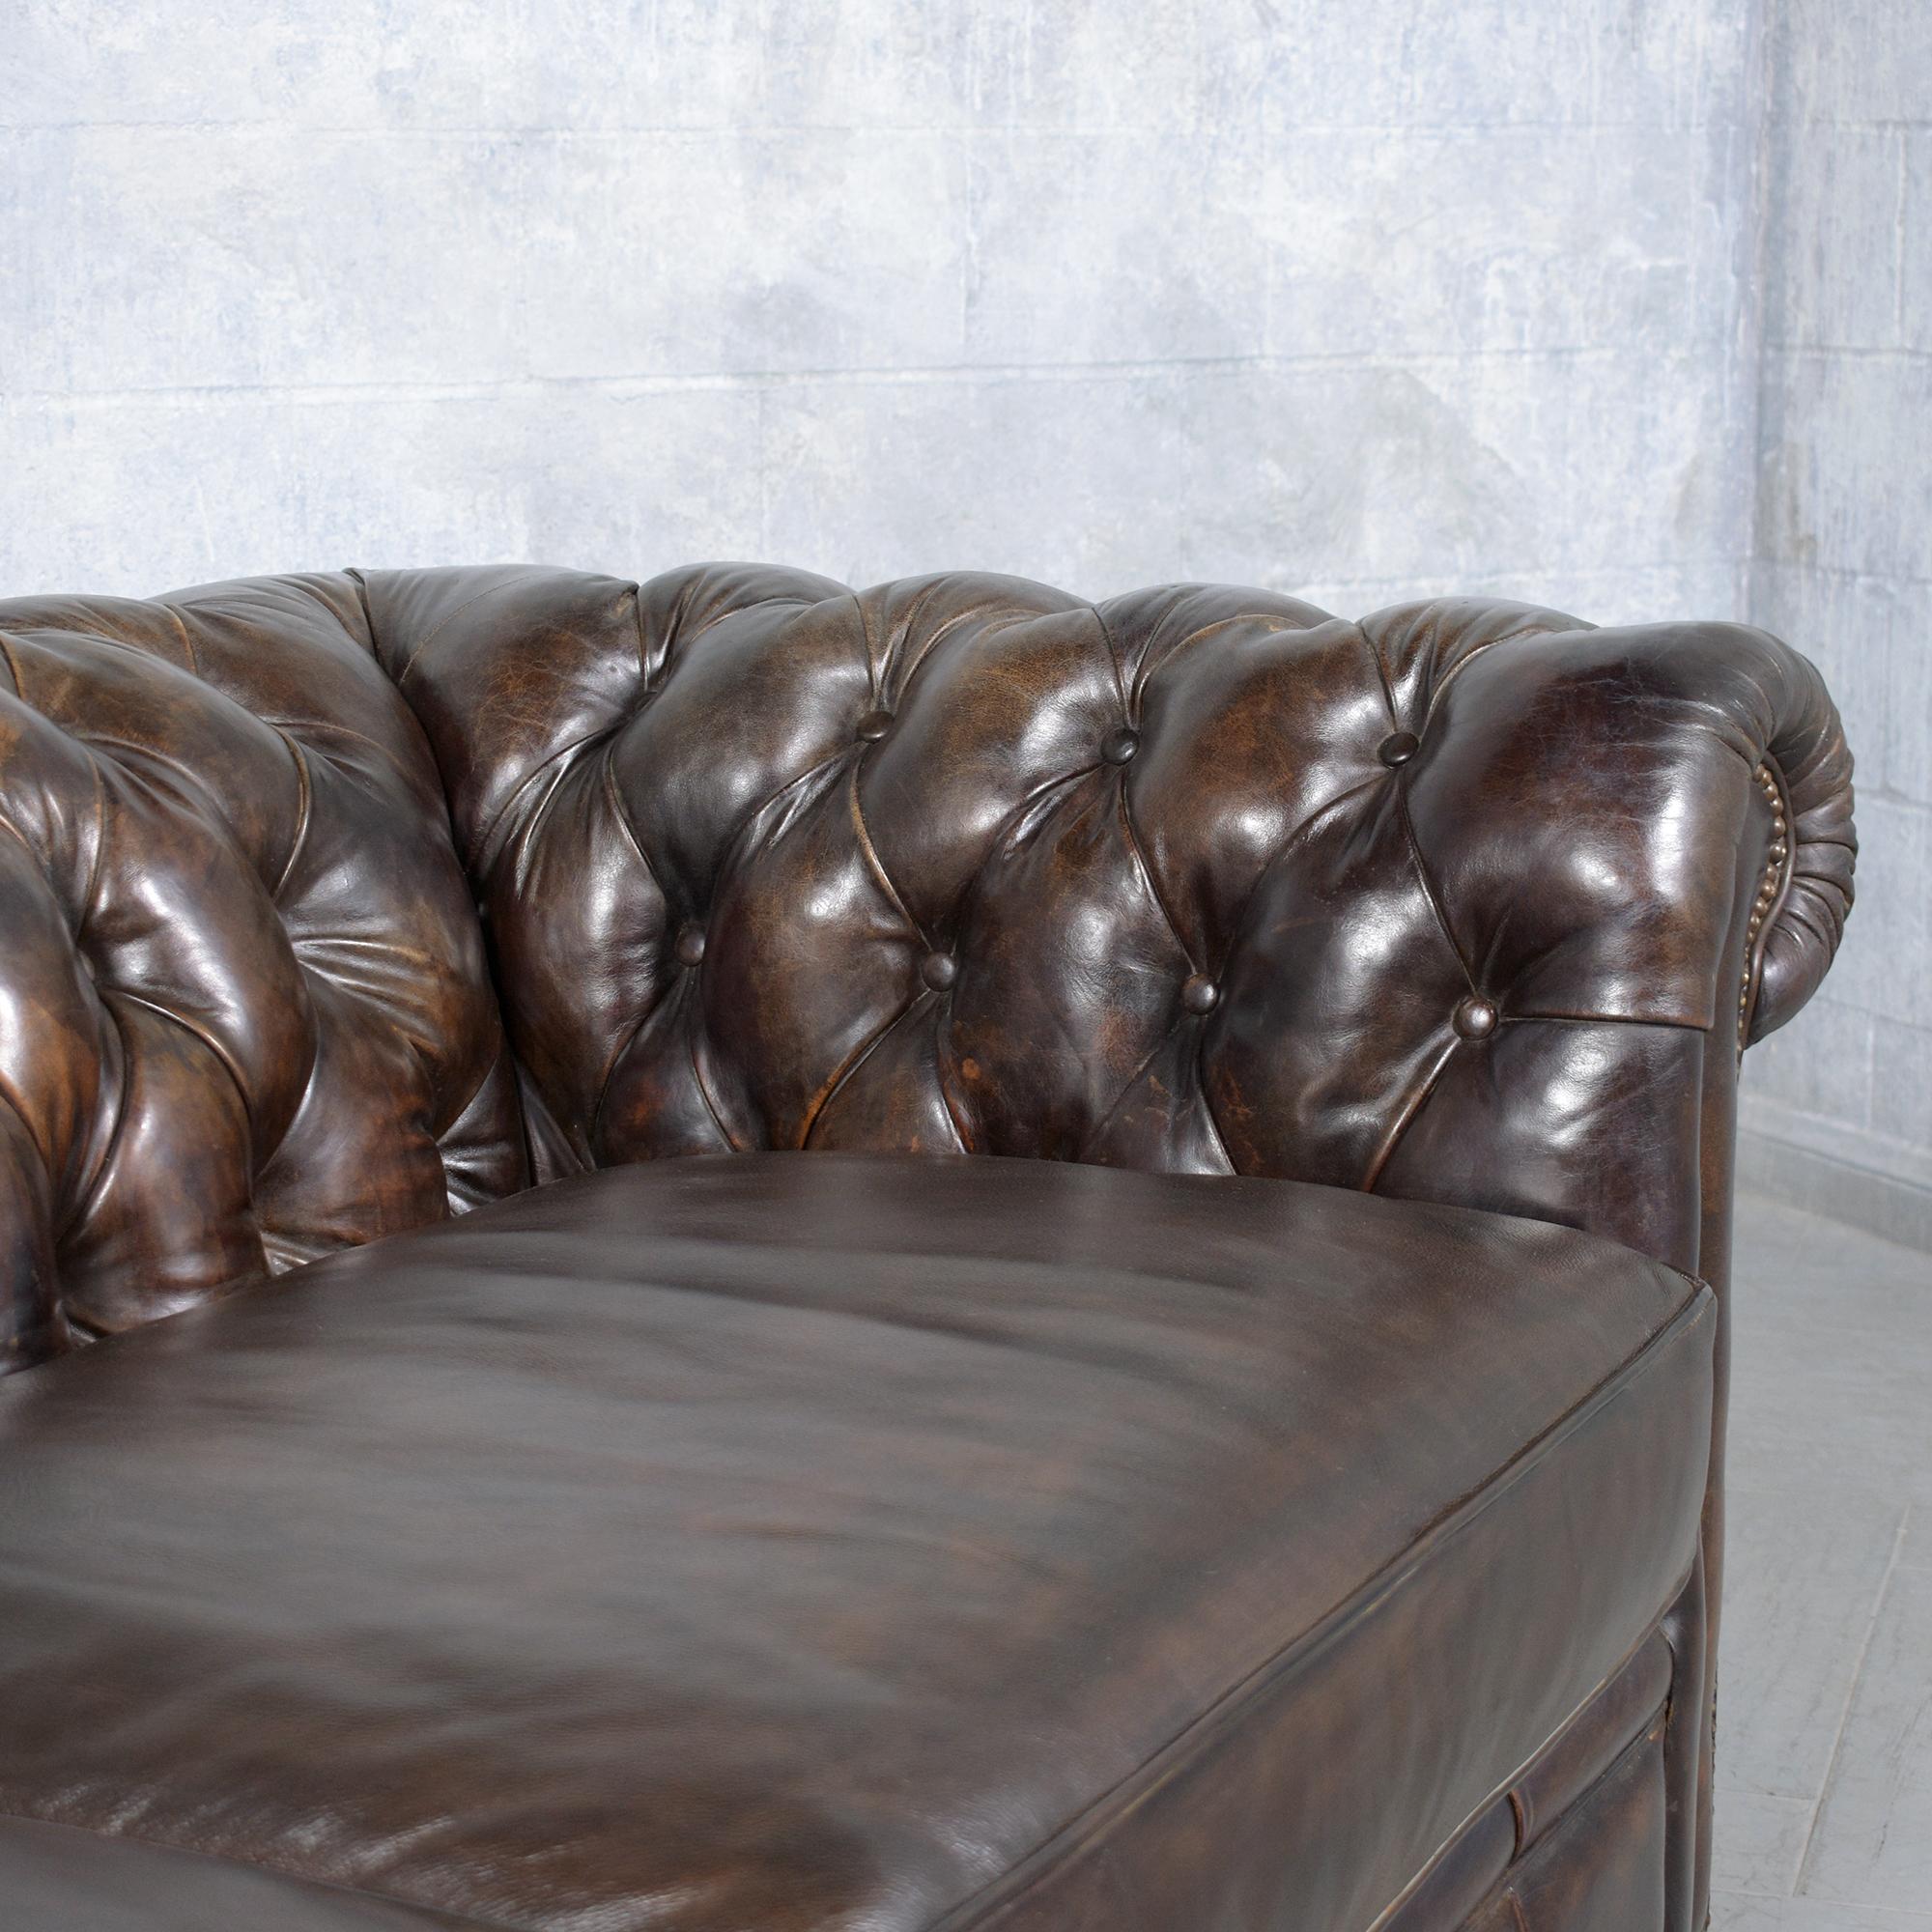 1970s Vintage Chesterfield Sofa: Brown Leather Elegance 2